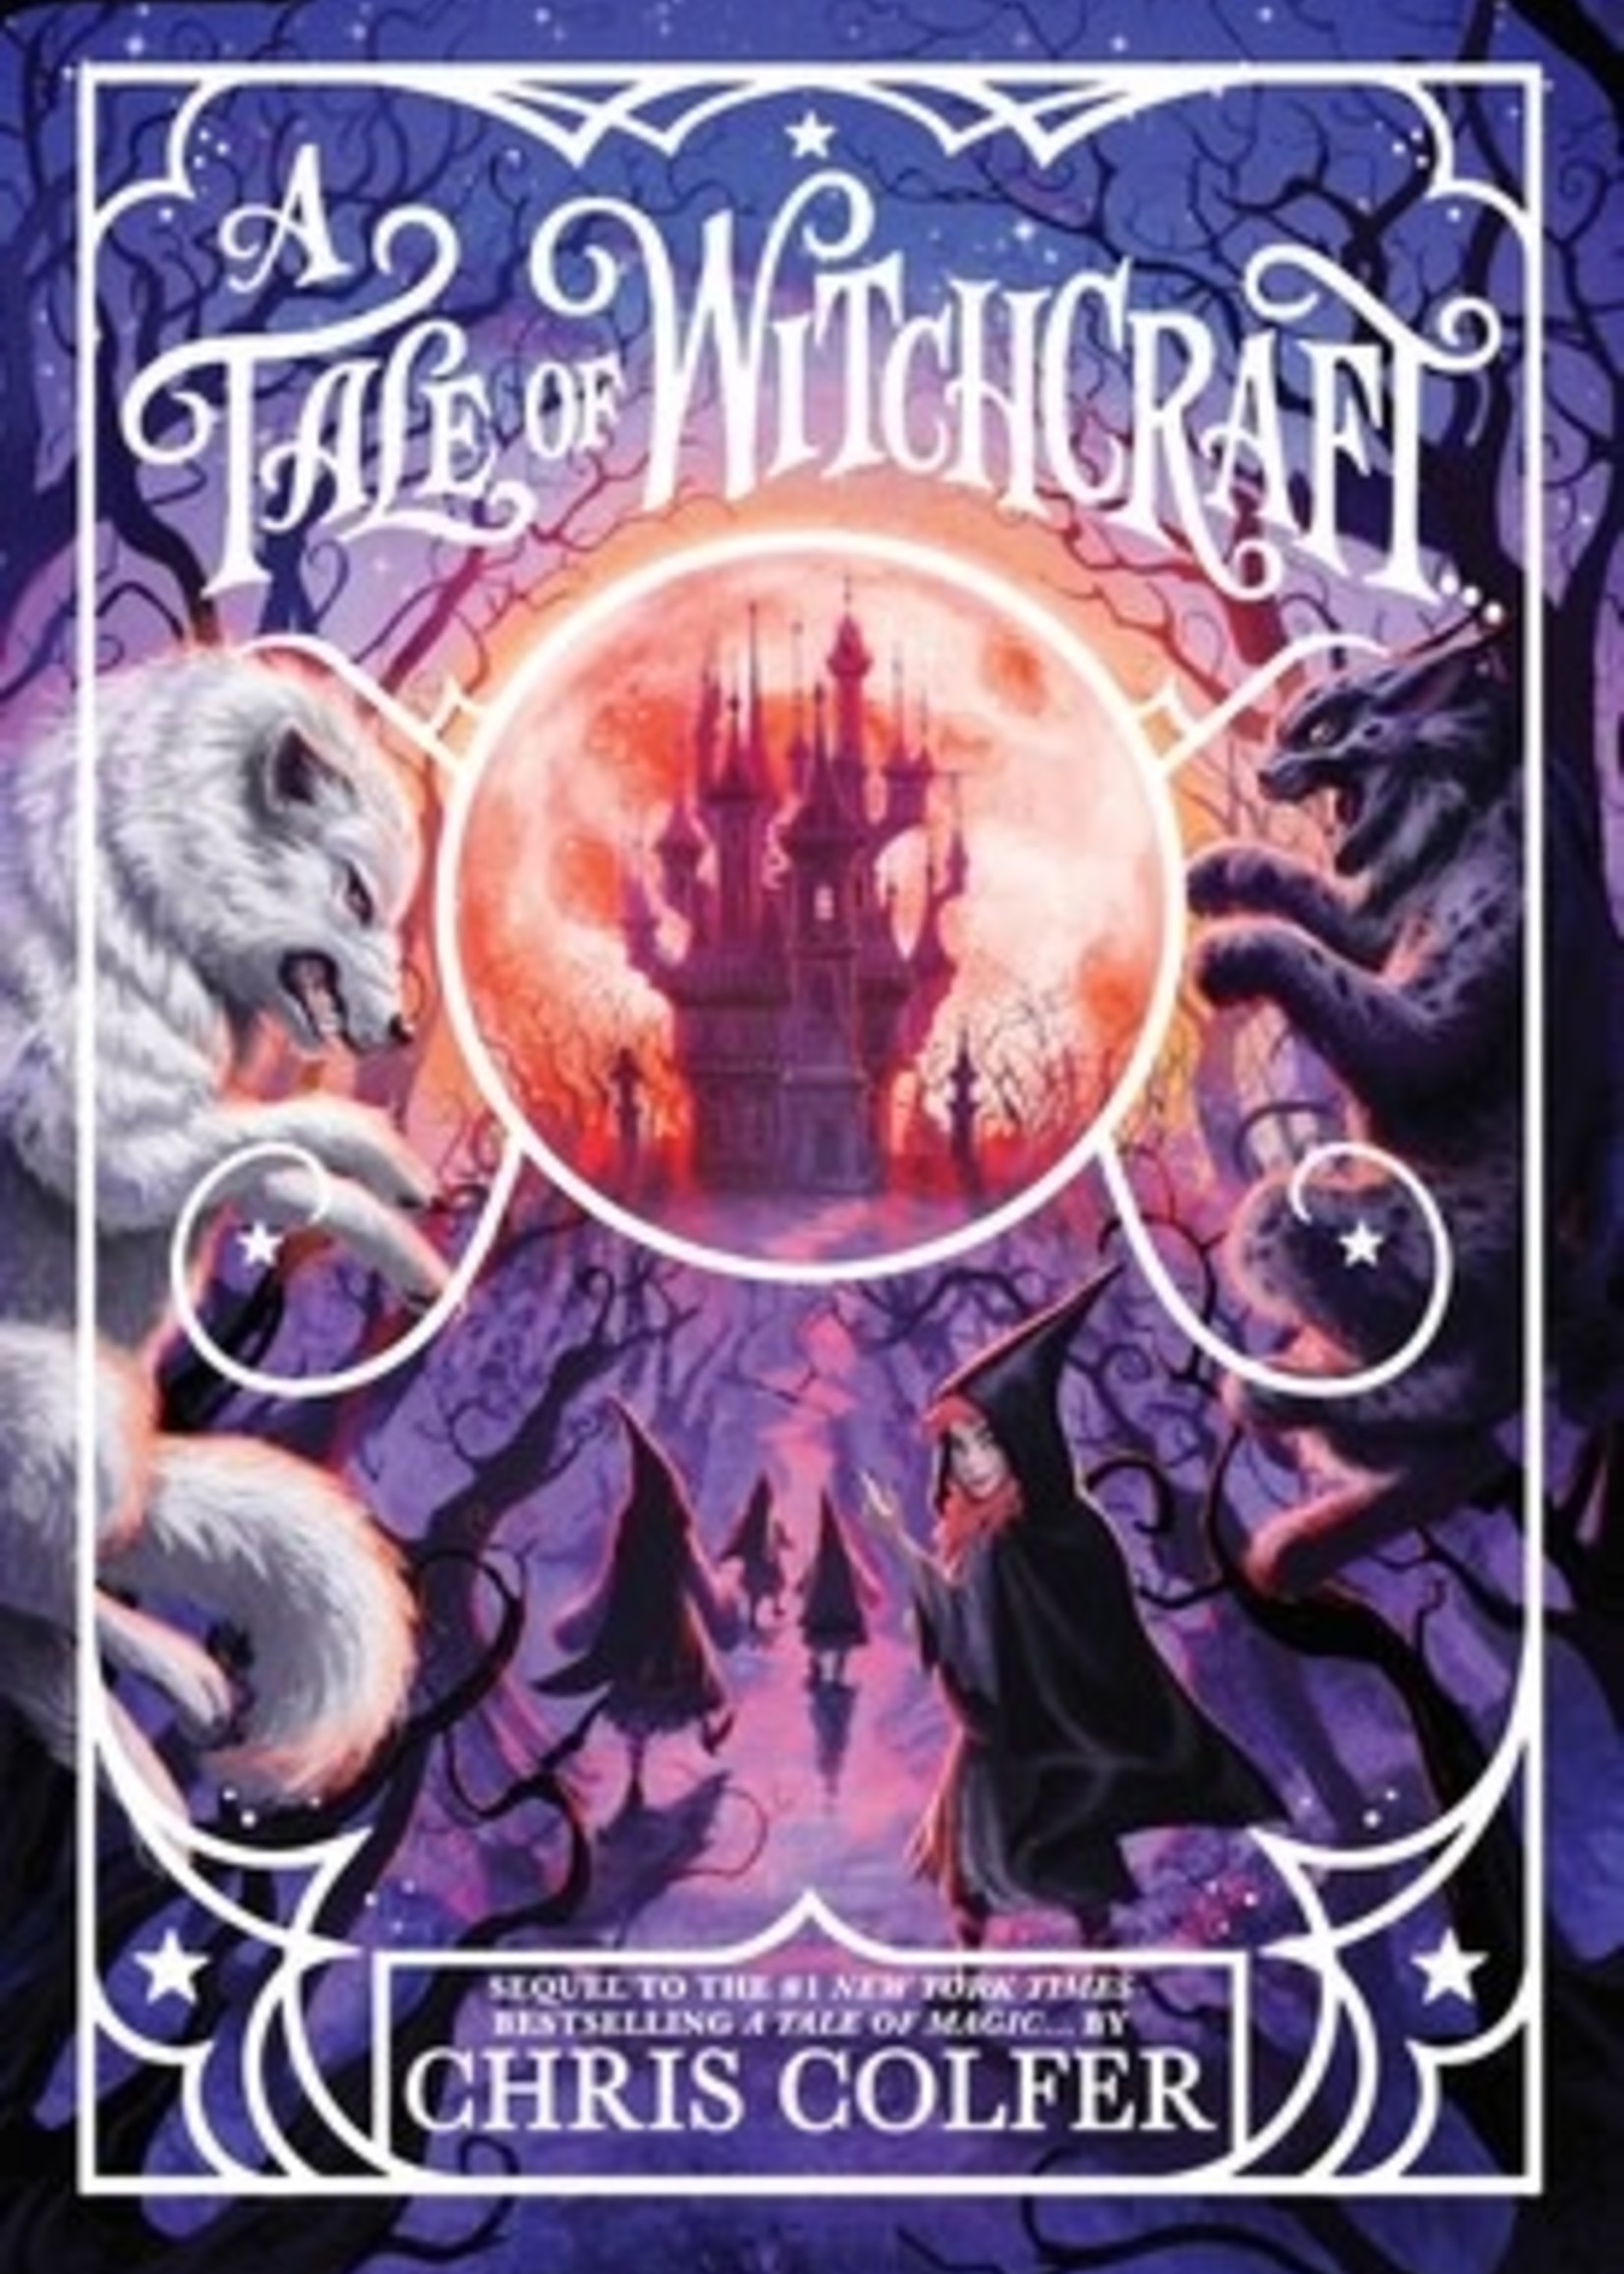 A Tale of Witchcraft... (A Tale of Magic #2) by Chris Colfer